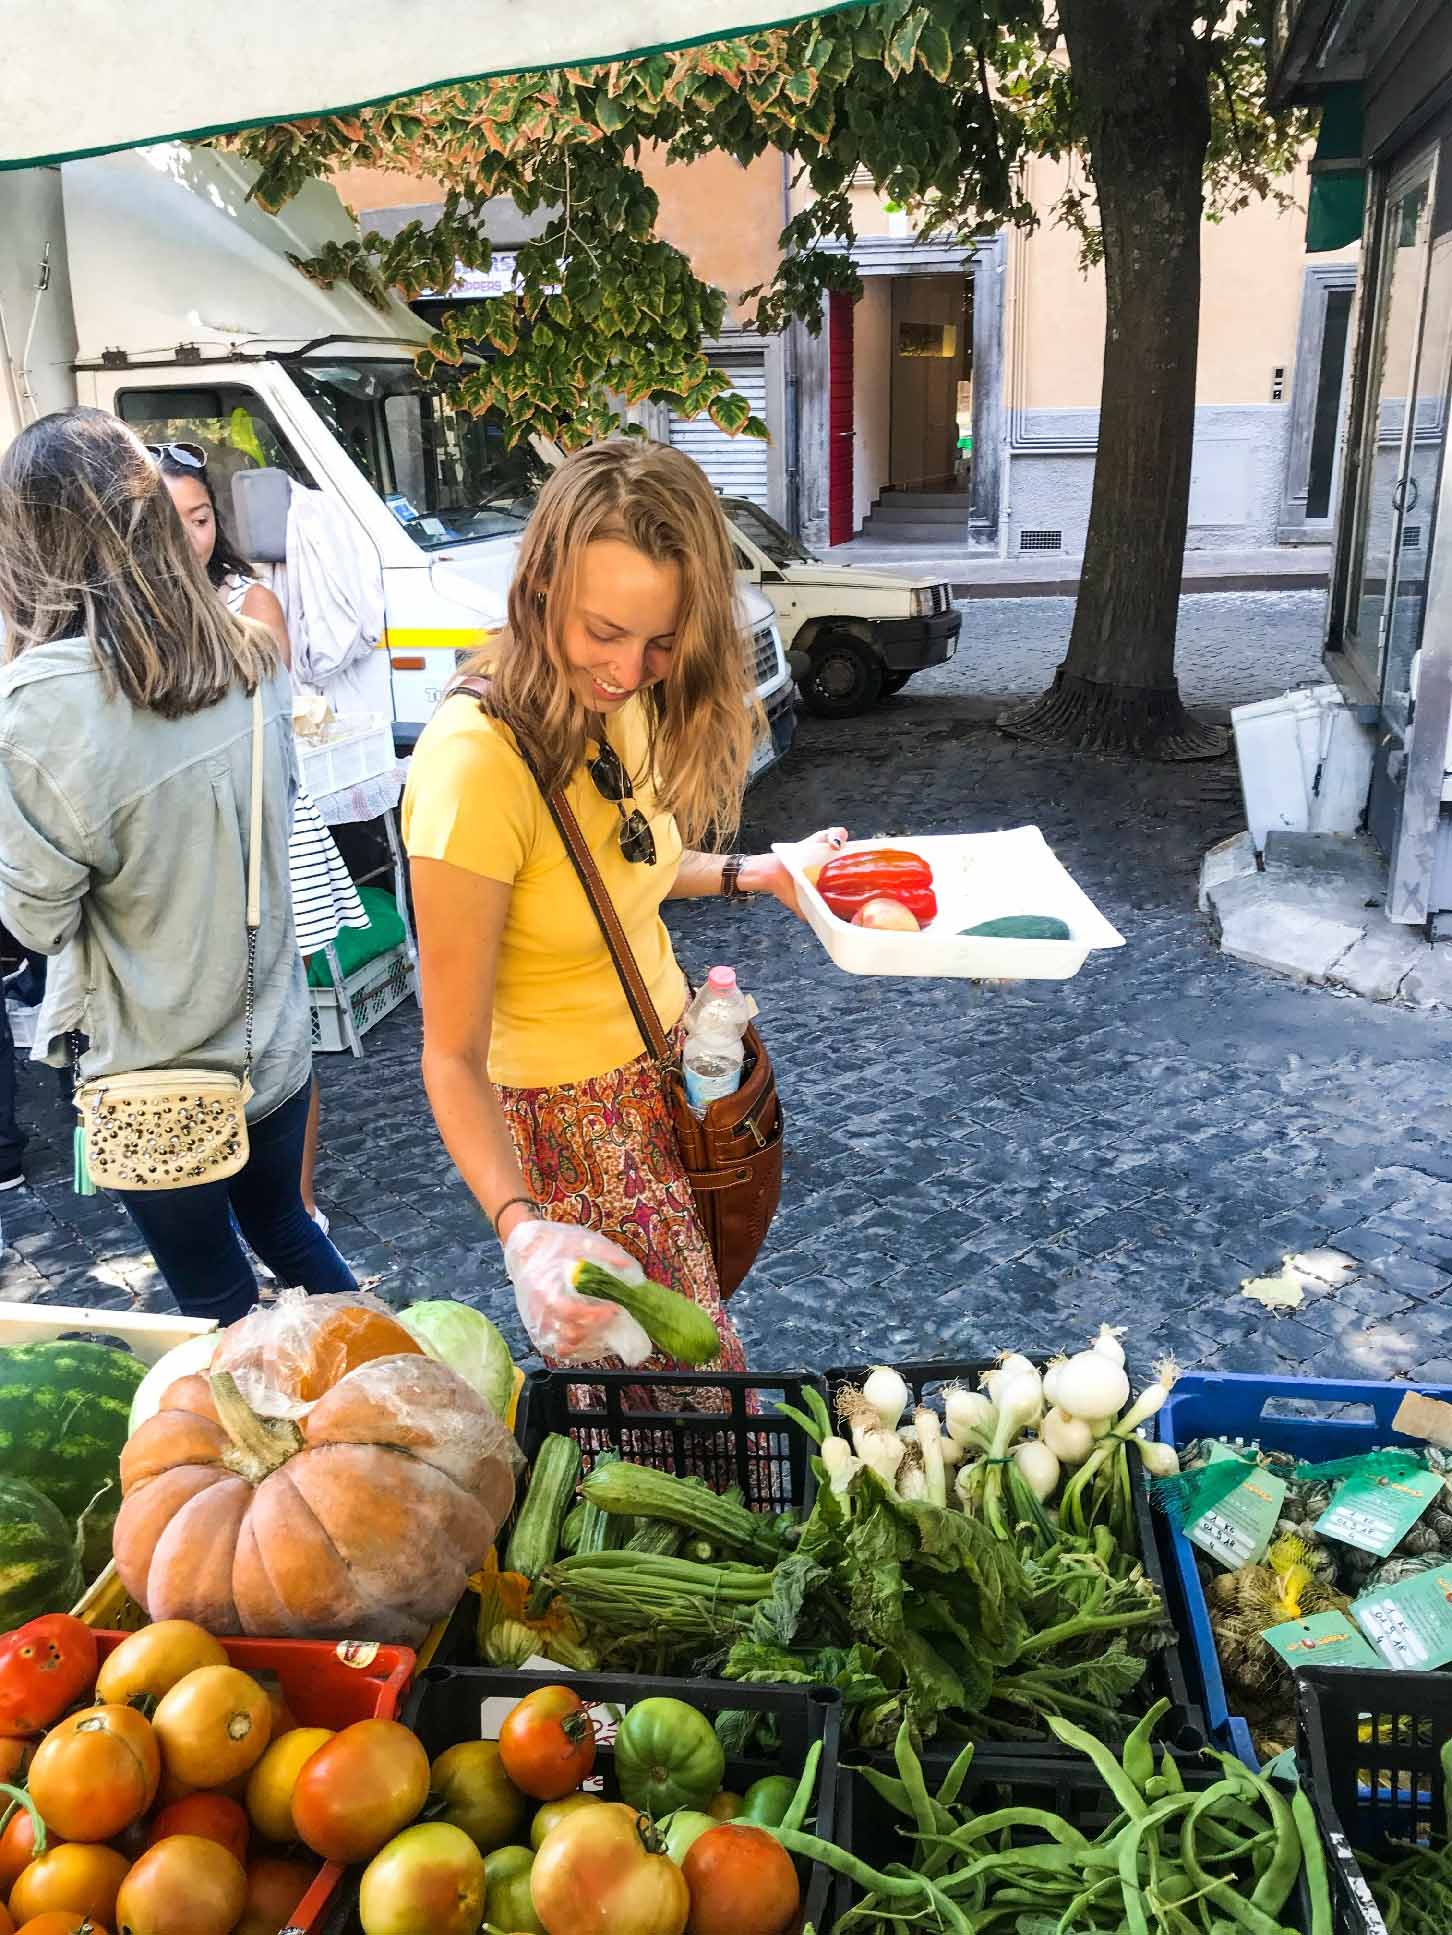 Student picking out local produce at the Saturday Market in Viterbo, Italy.